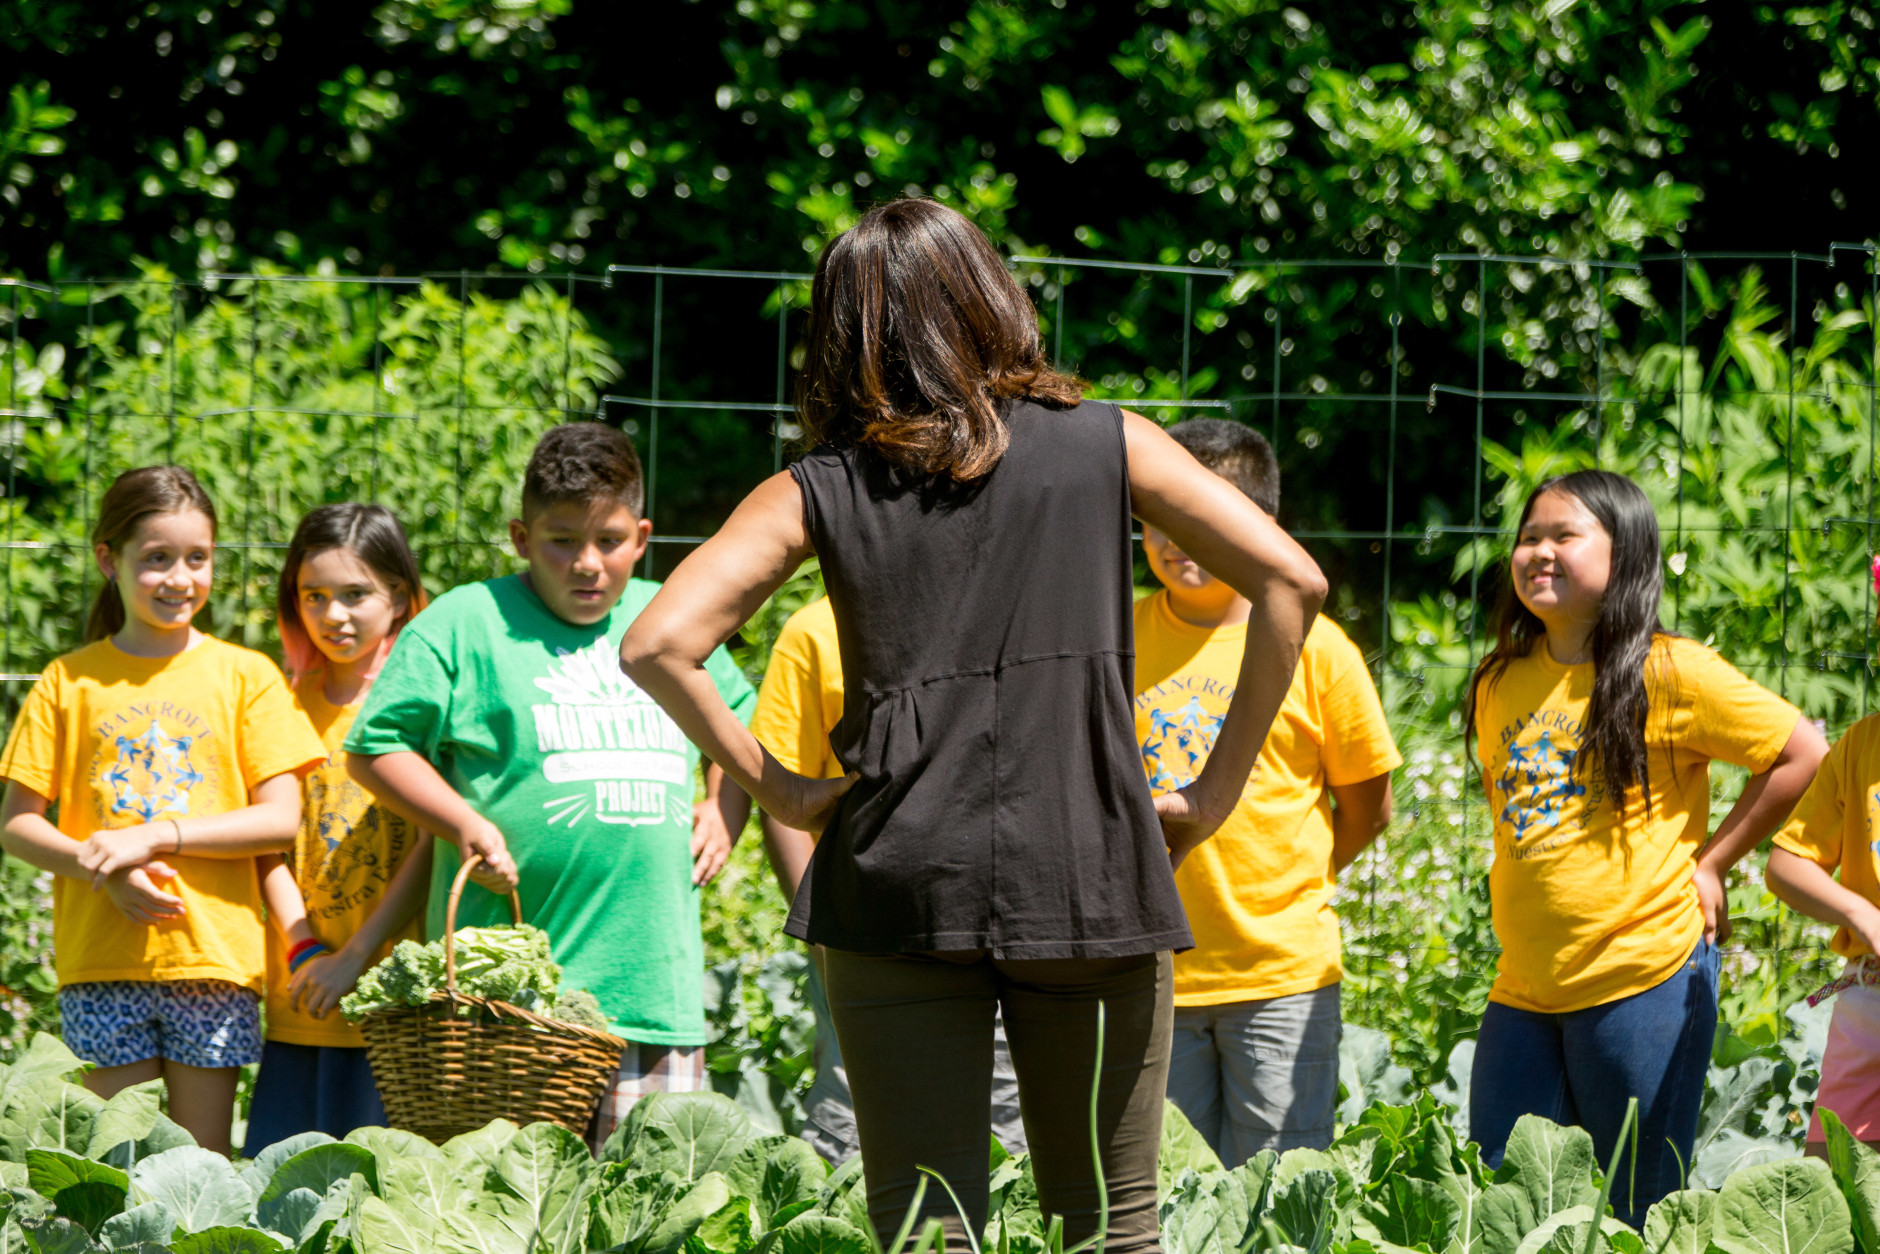 First lady Michelle Obama speaks to school children from across the country as they harvest the White House Kitchen Garden, Monday, June 6, 2016, at the White House in Washington. (AP Photo/Andrew Harnik)